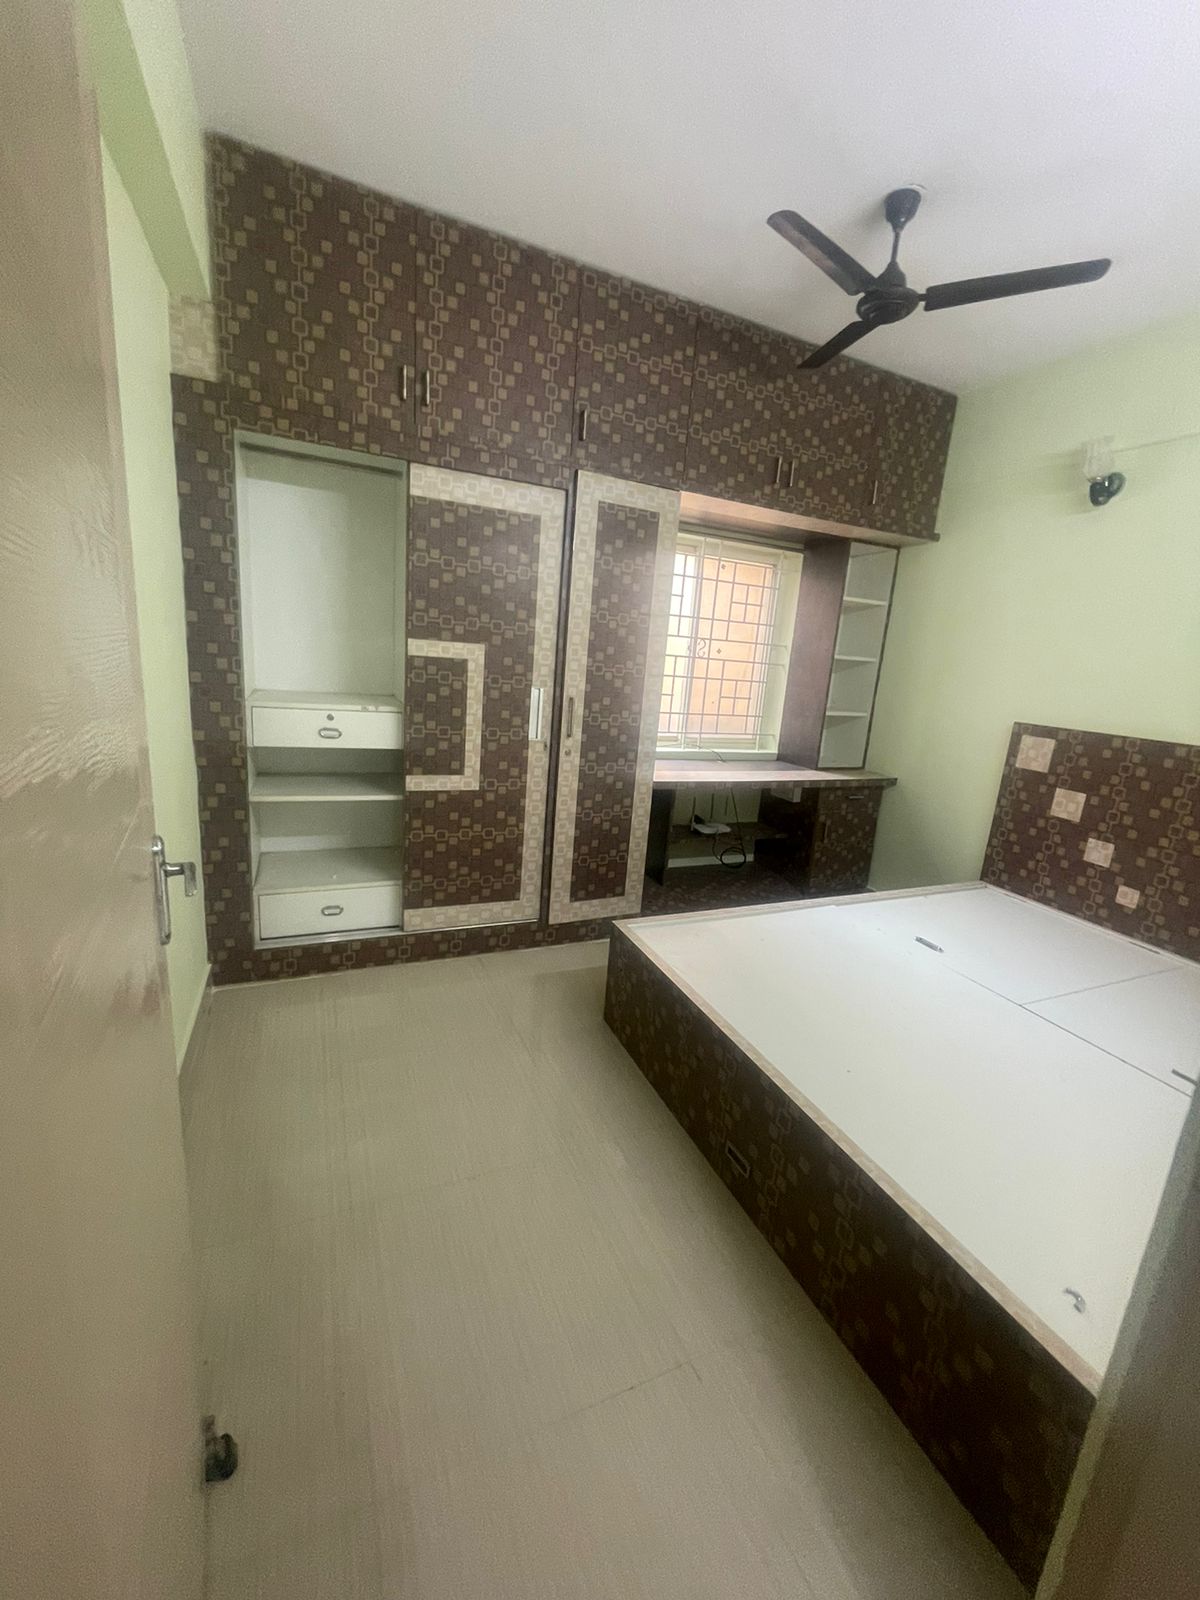 2 BHK Independent House for Lease Only at JAML2 - 4146 in M.S. Ramaiah Nagar